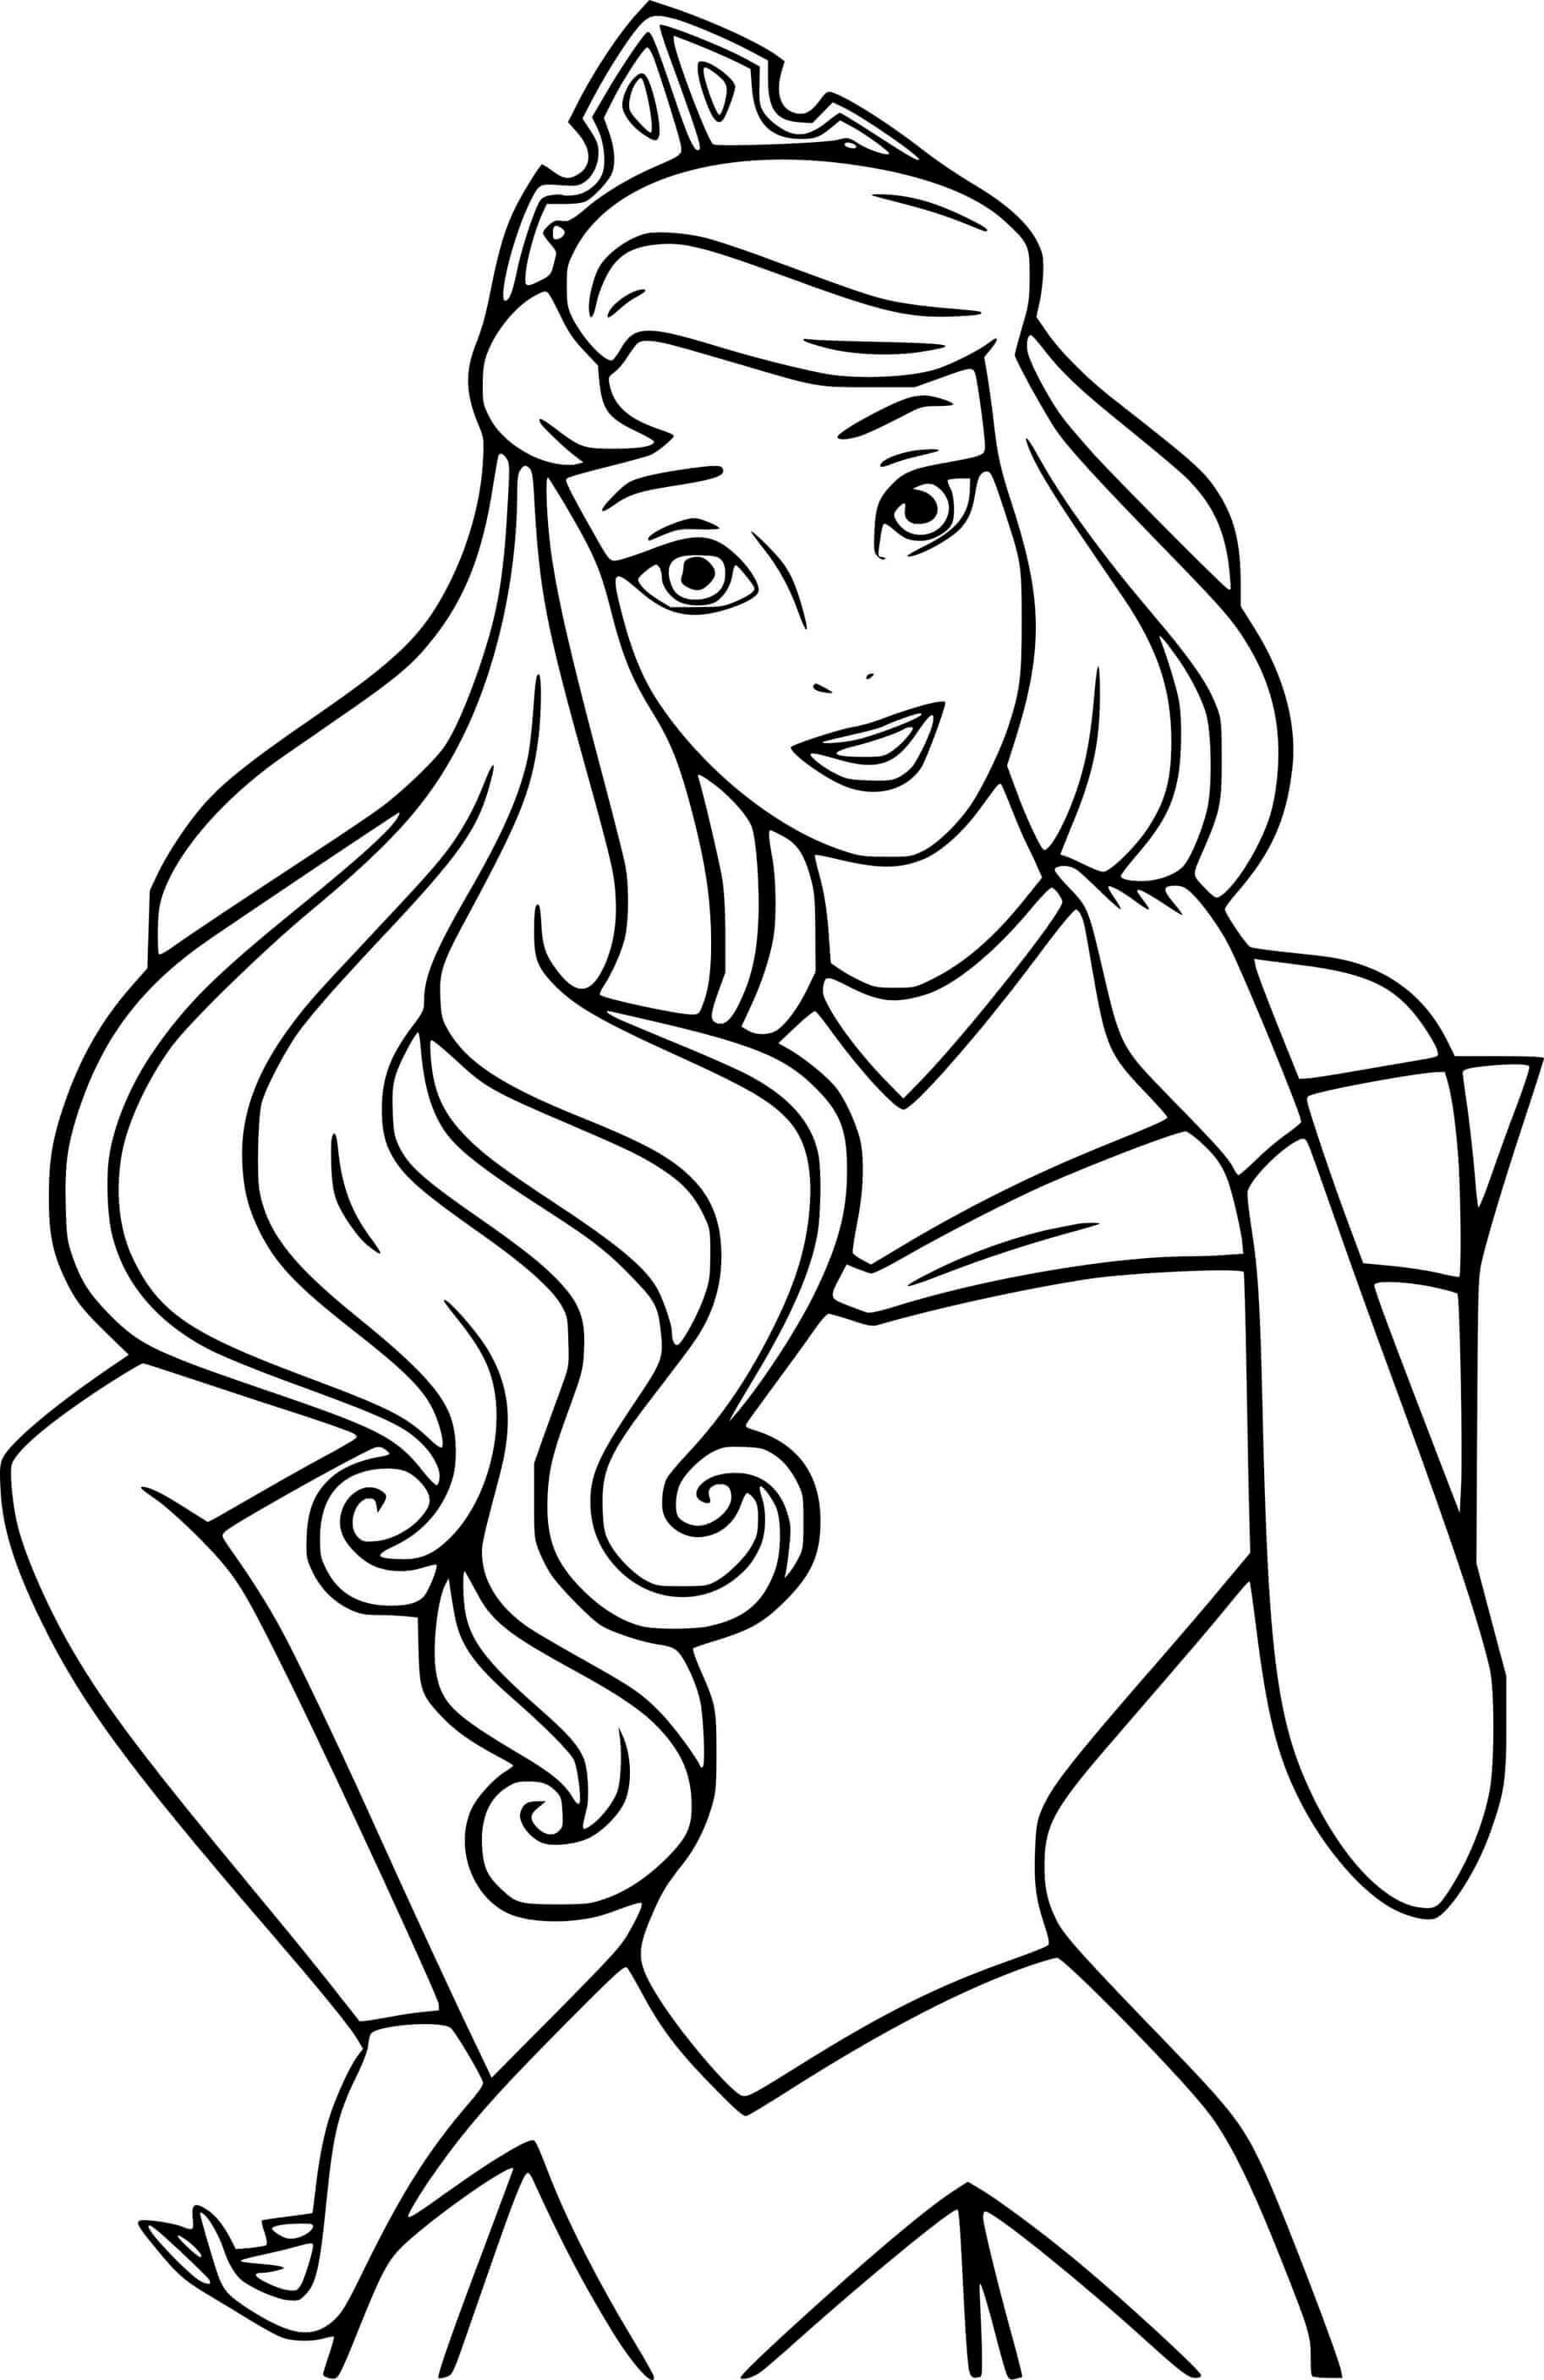 Aurora Wears A Crown Disney Princess Coloring Pages   Coloring Cool